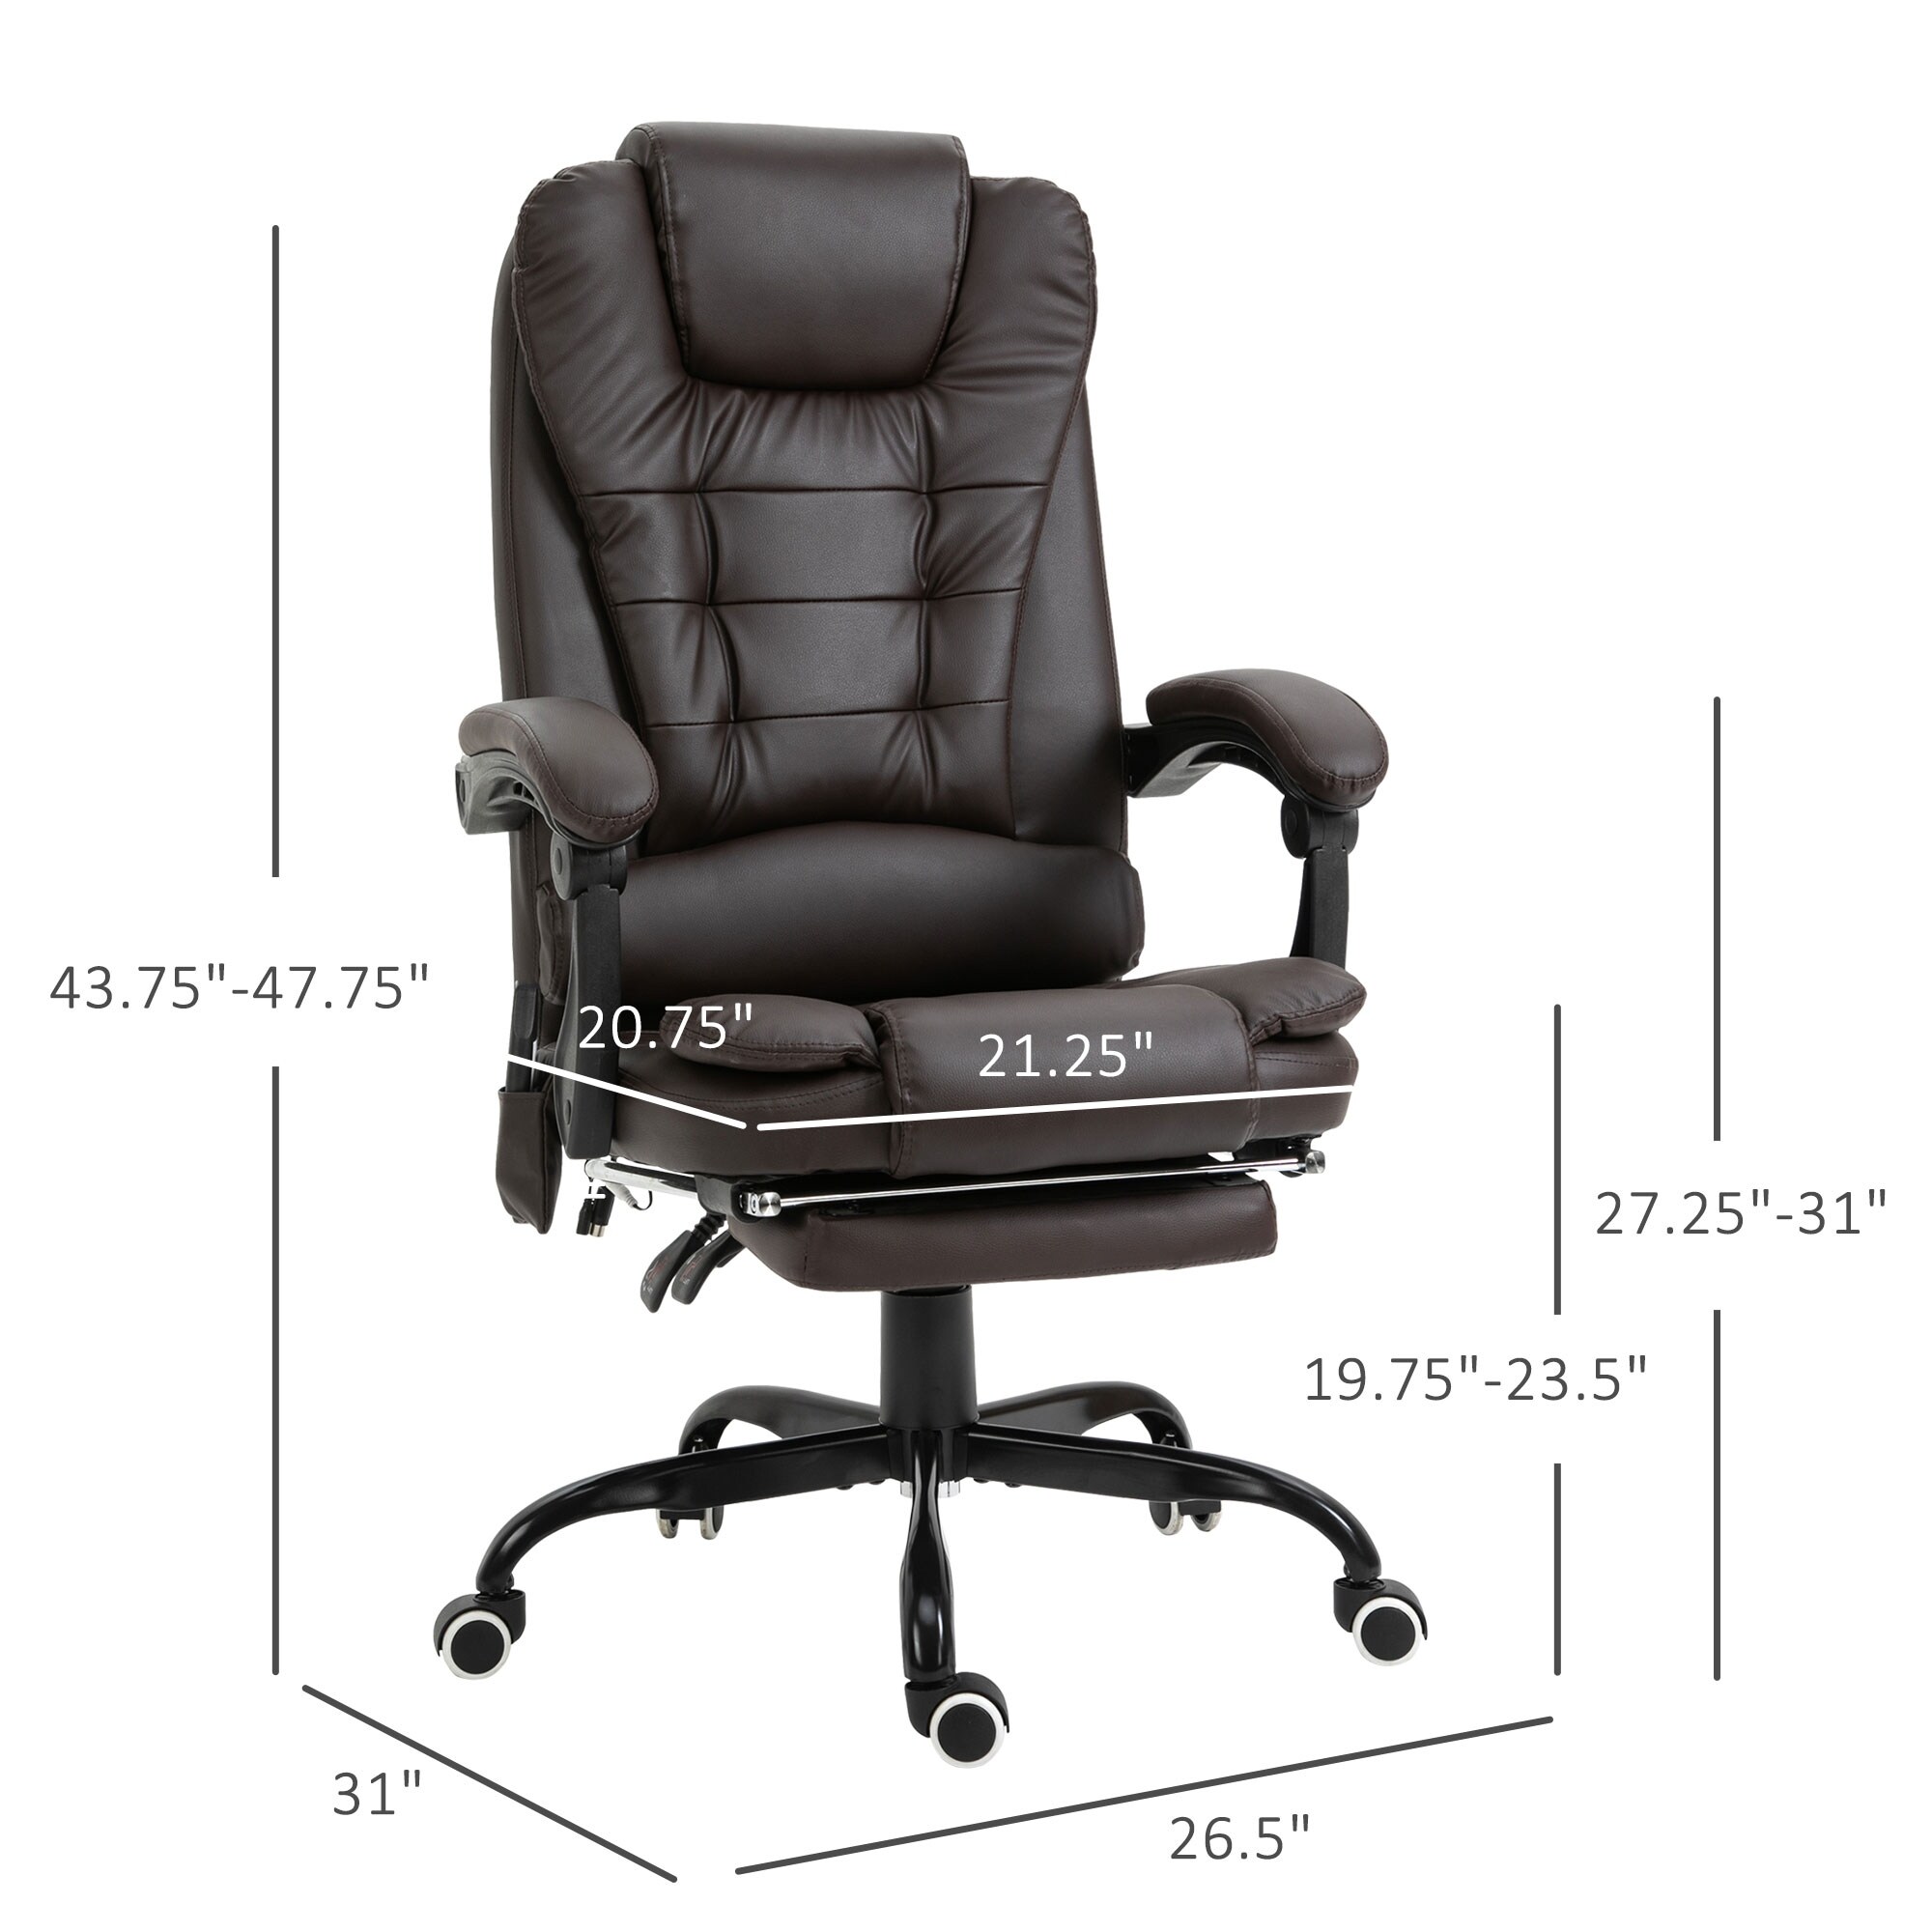 https://ak1.ostkcdn.com/images/products/is/images/direct/166f0e6557c56ca6d352b9234b8ea370cad589d3/Vinsetto-7-Point-Vibrating-Massage-Office-Chair-High-Back-Executive-Recliner-with-Lumbar-Support%2C-Footrest%2C-Reclining-Back.jpg